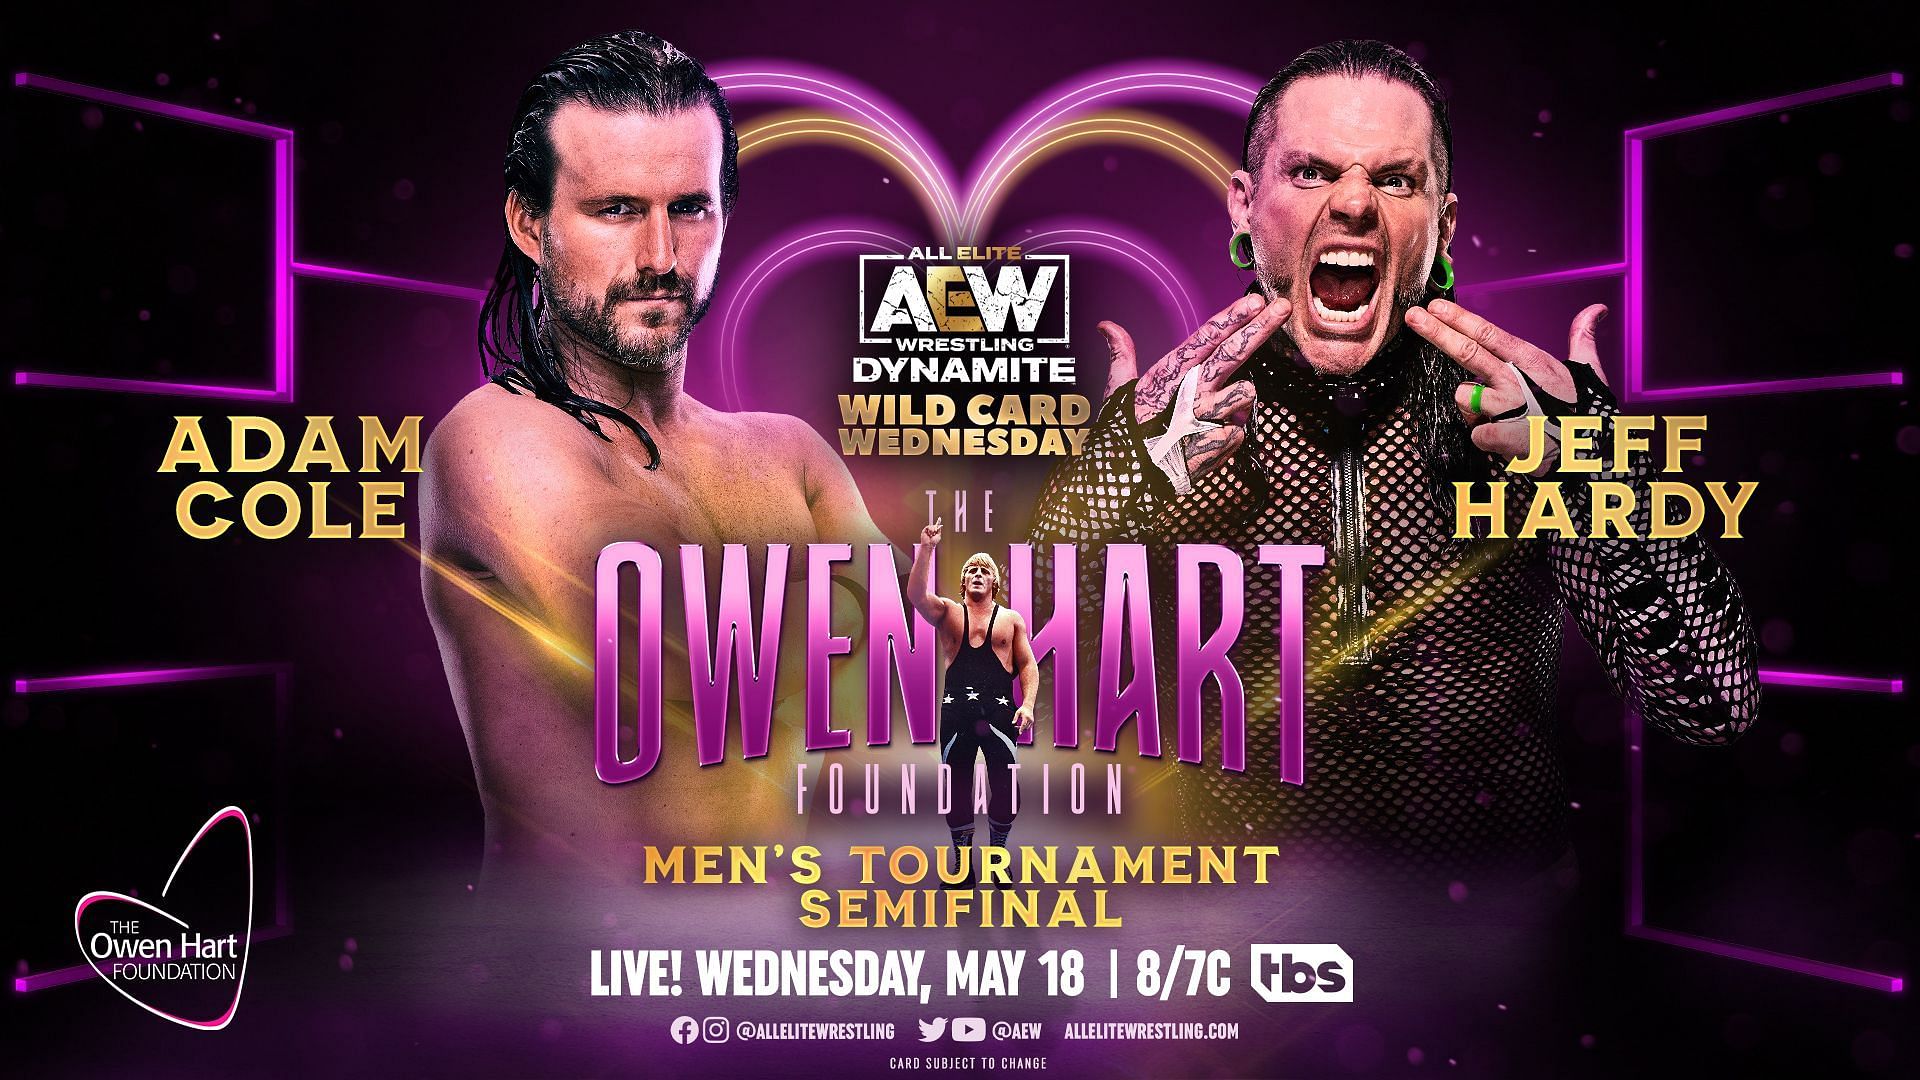 Will Jeff Hardy remain undefeated in AEW?